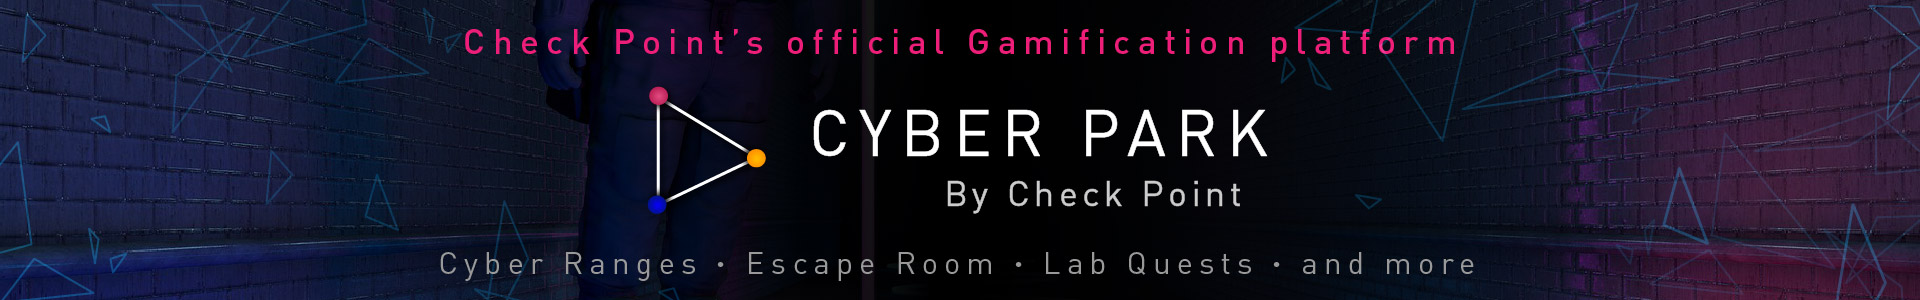 Check Point Cyber Park